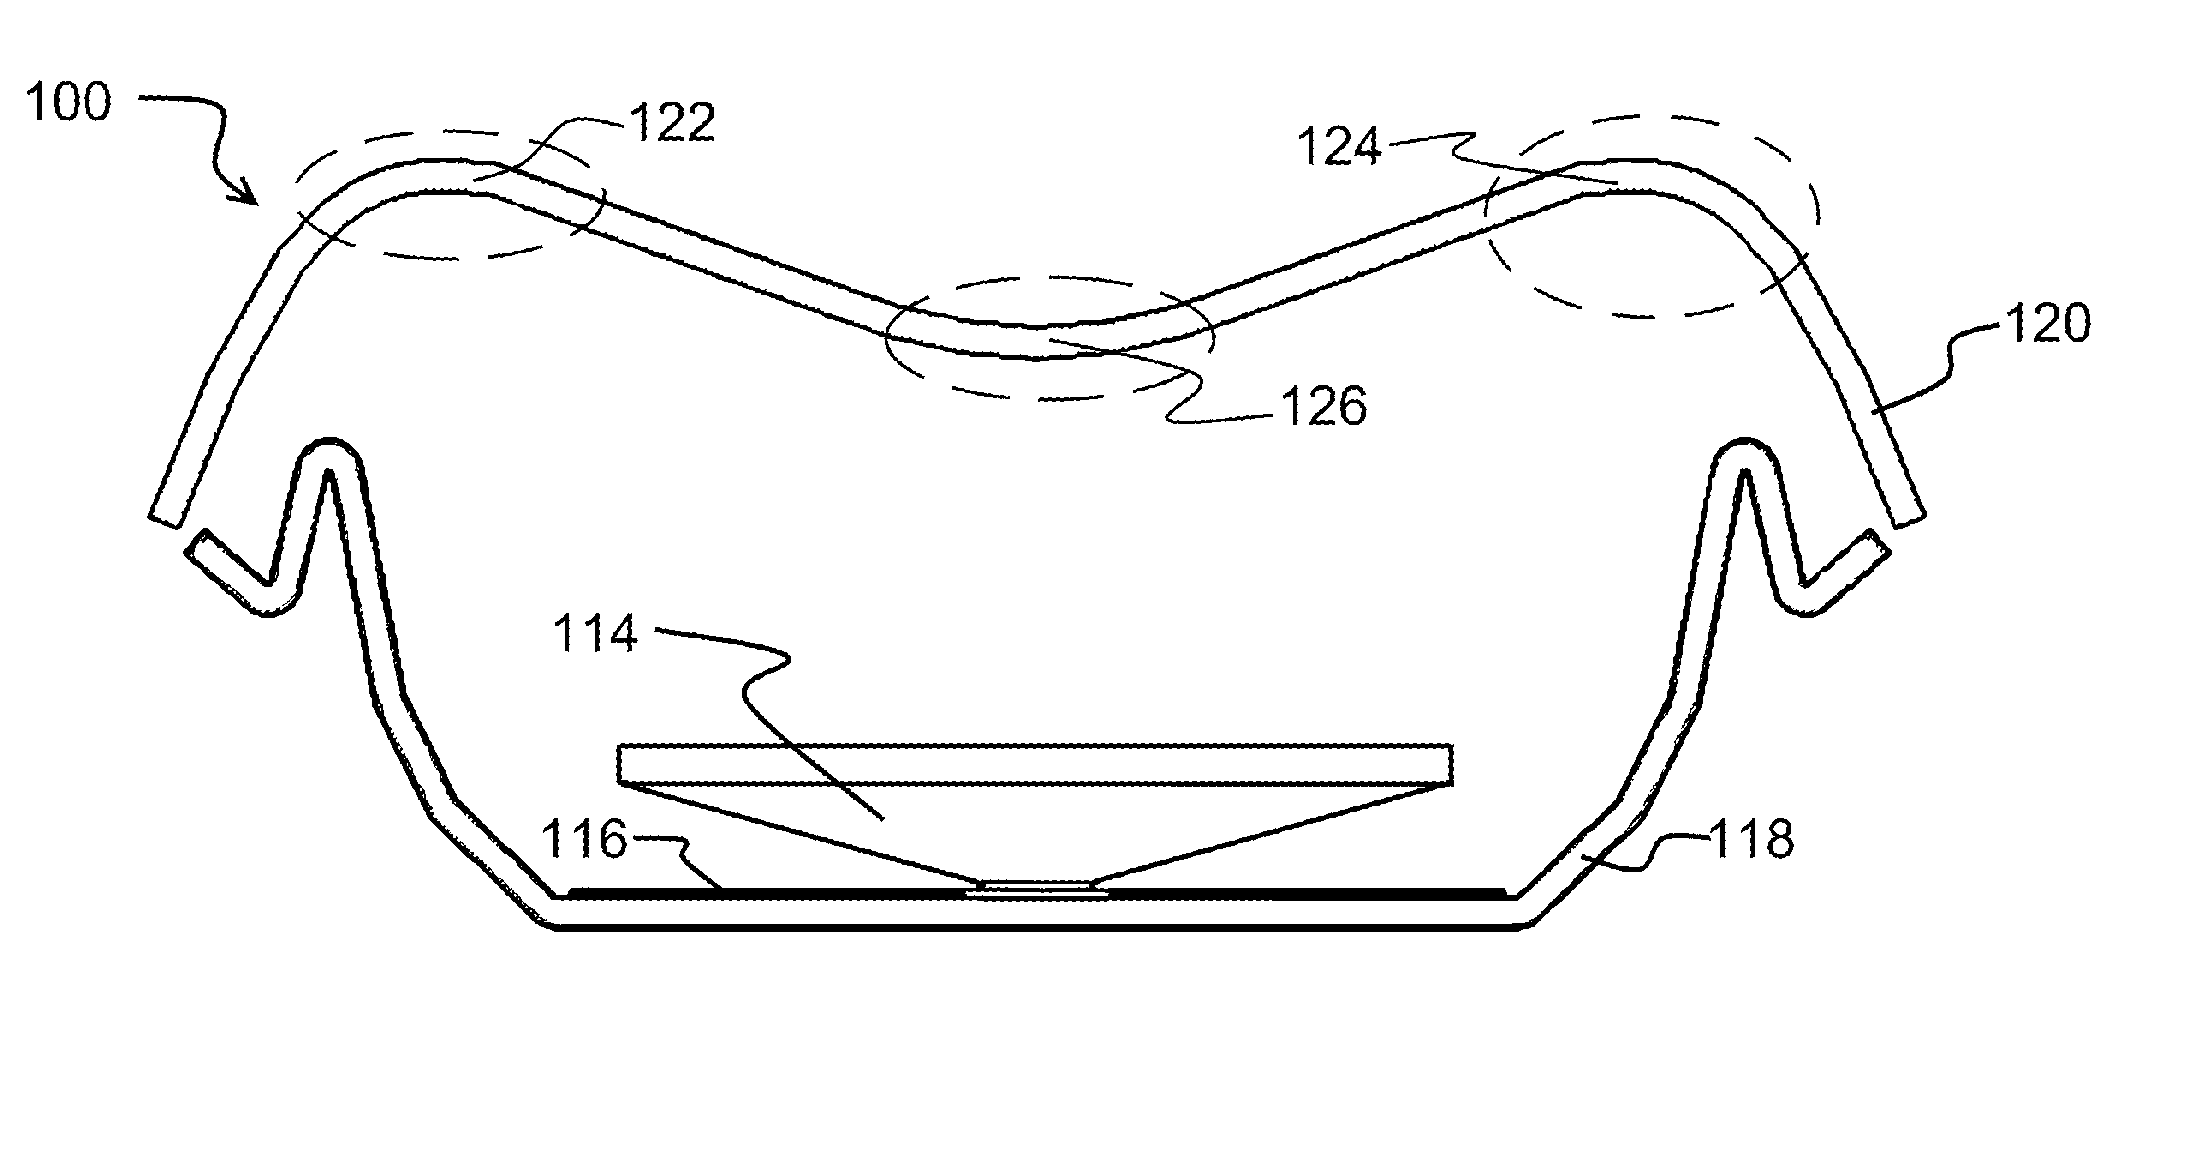 Antenna system and method